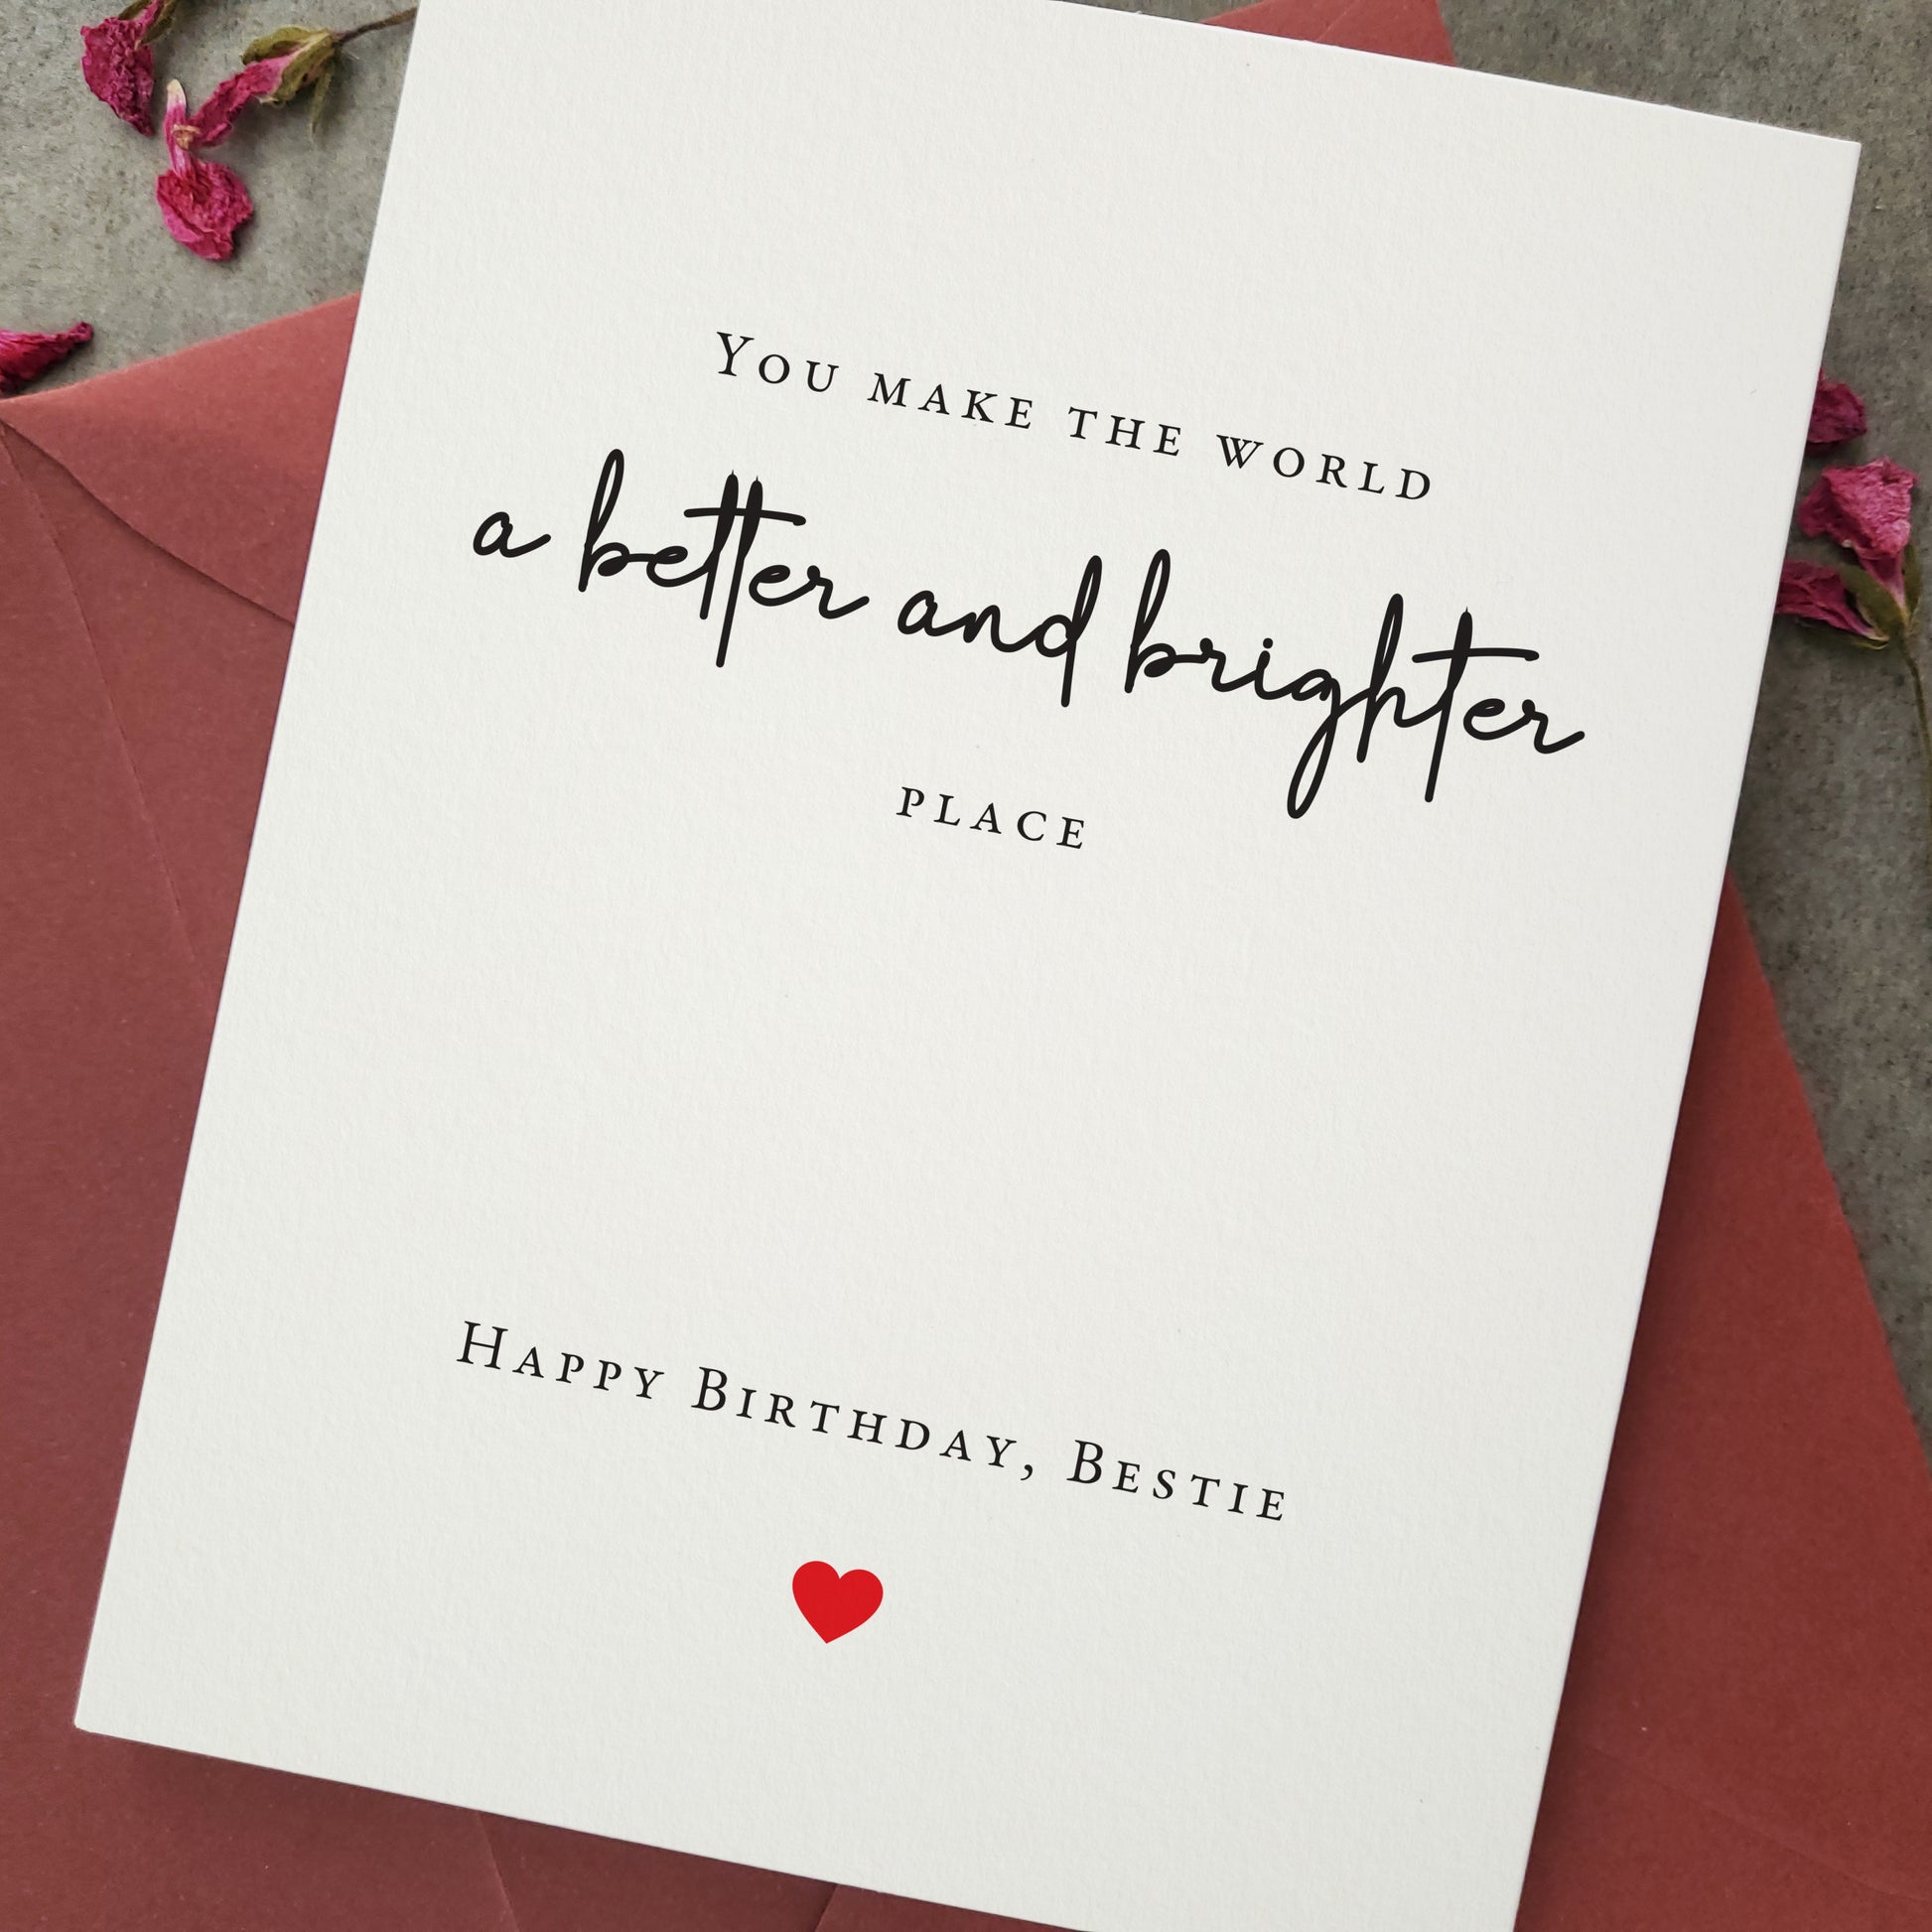 you make the world a better place birthday card for bestie - XOXOKristen